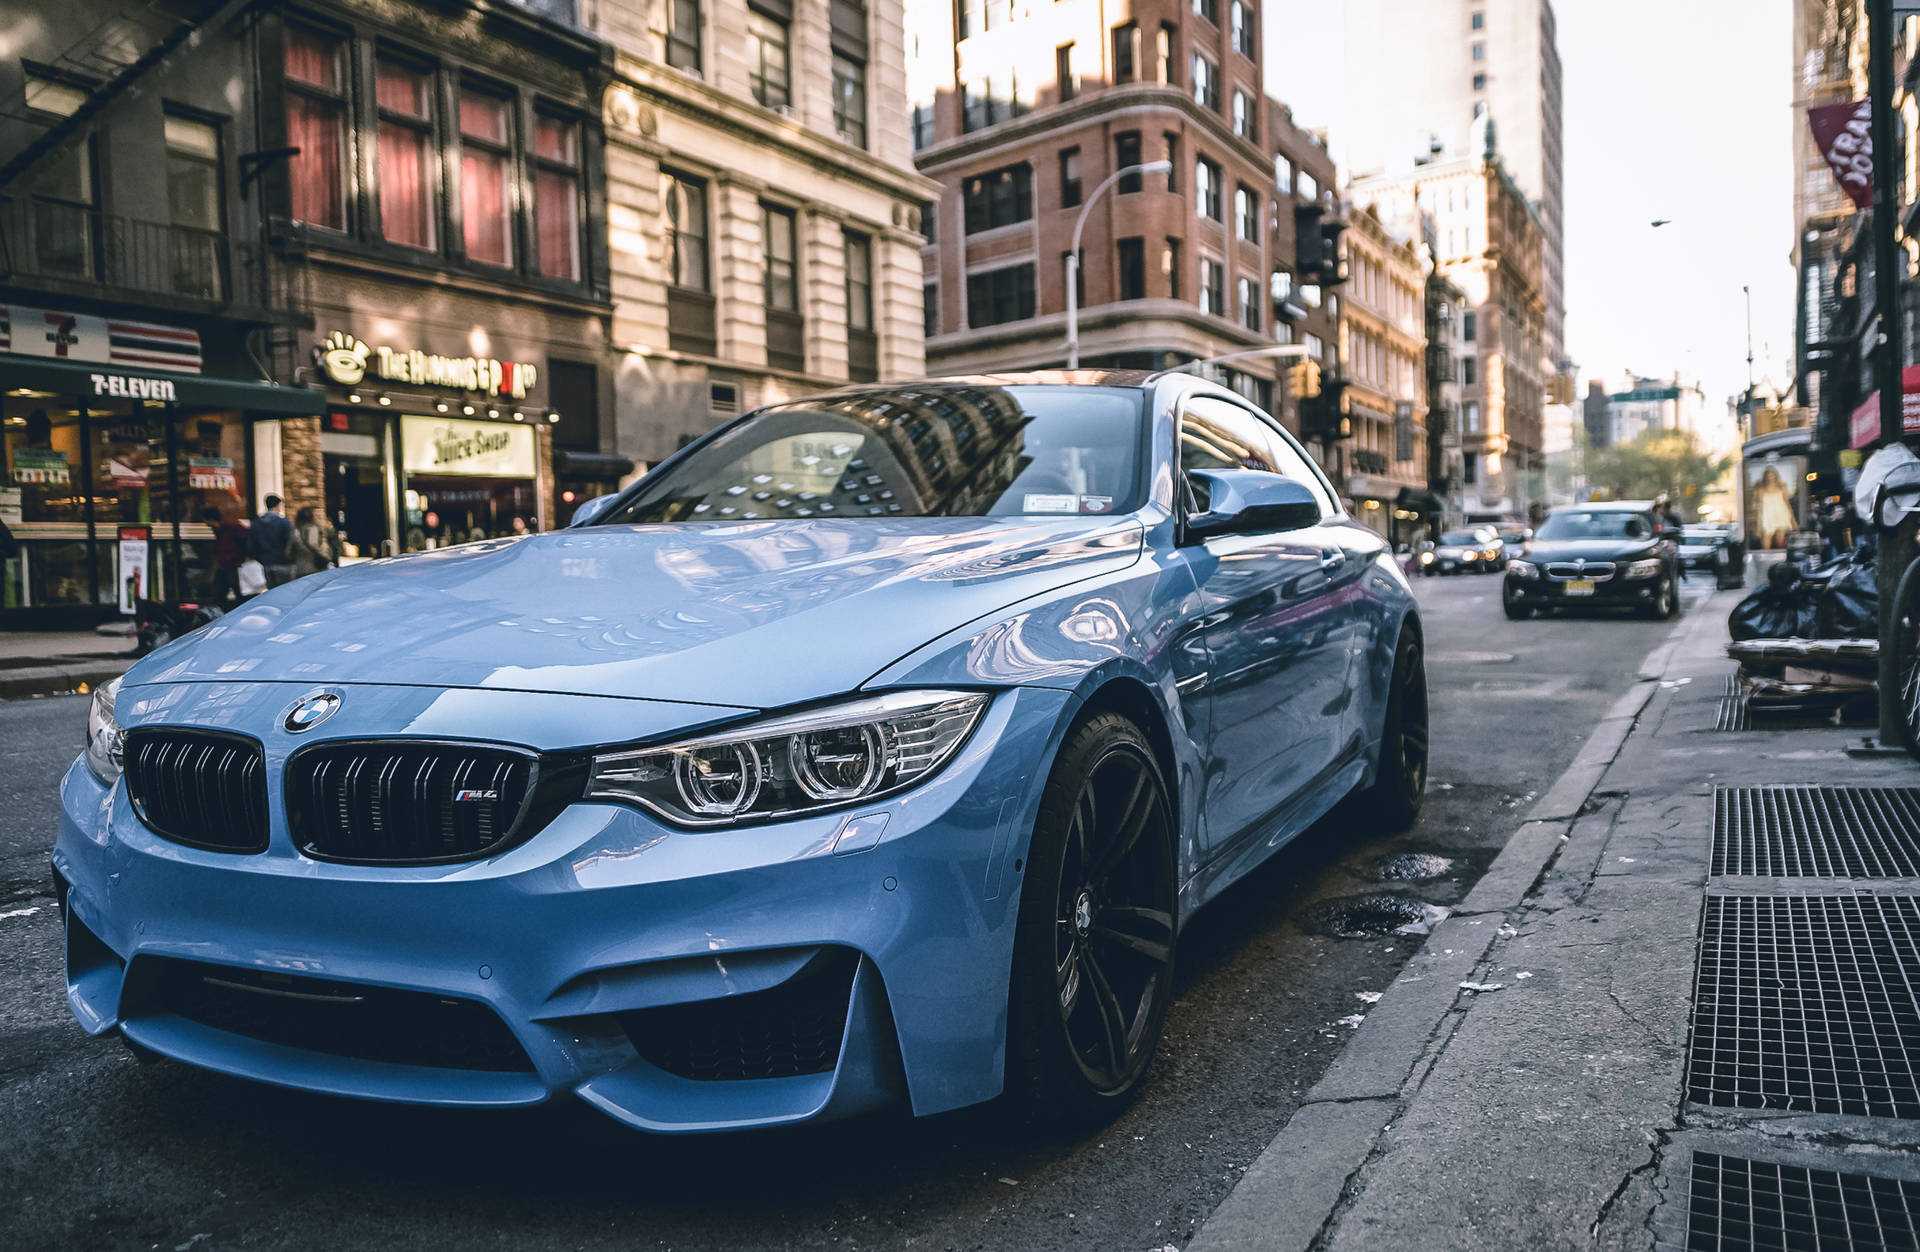 4k Bmw Wallpapers